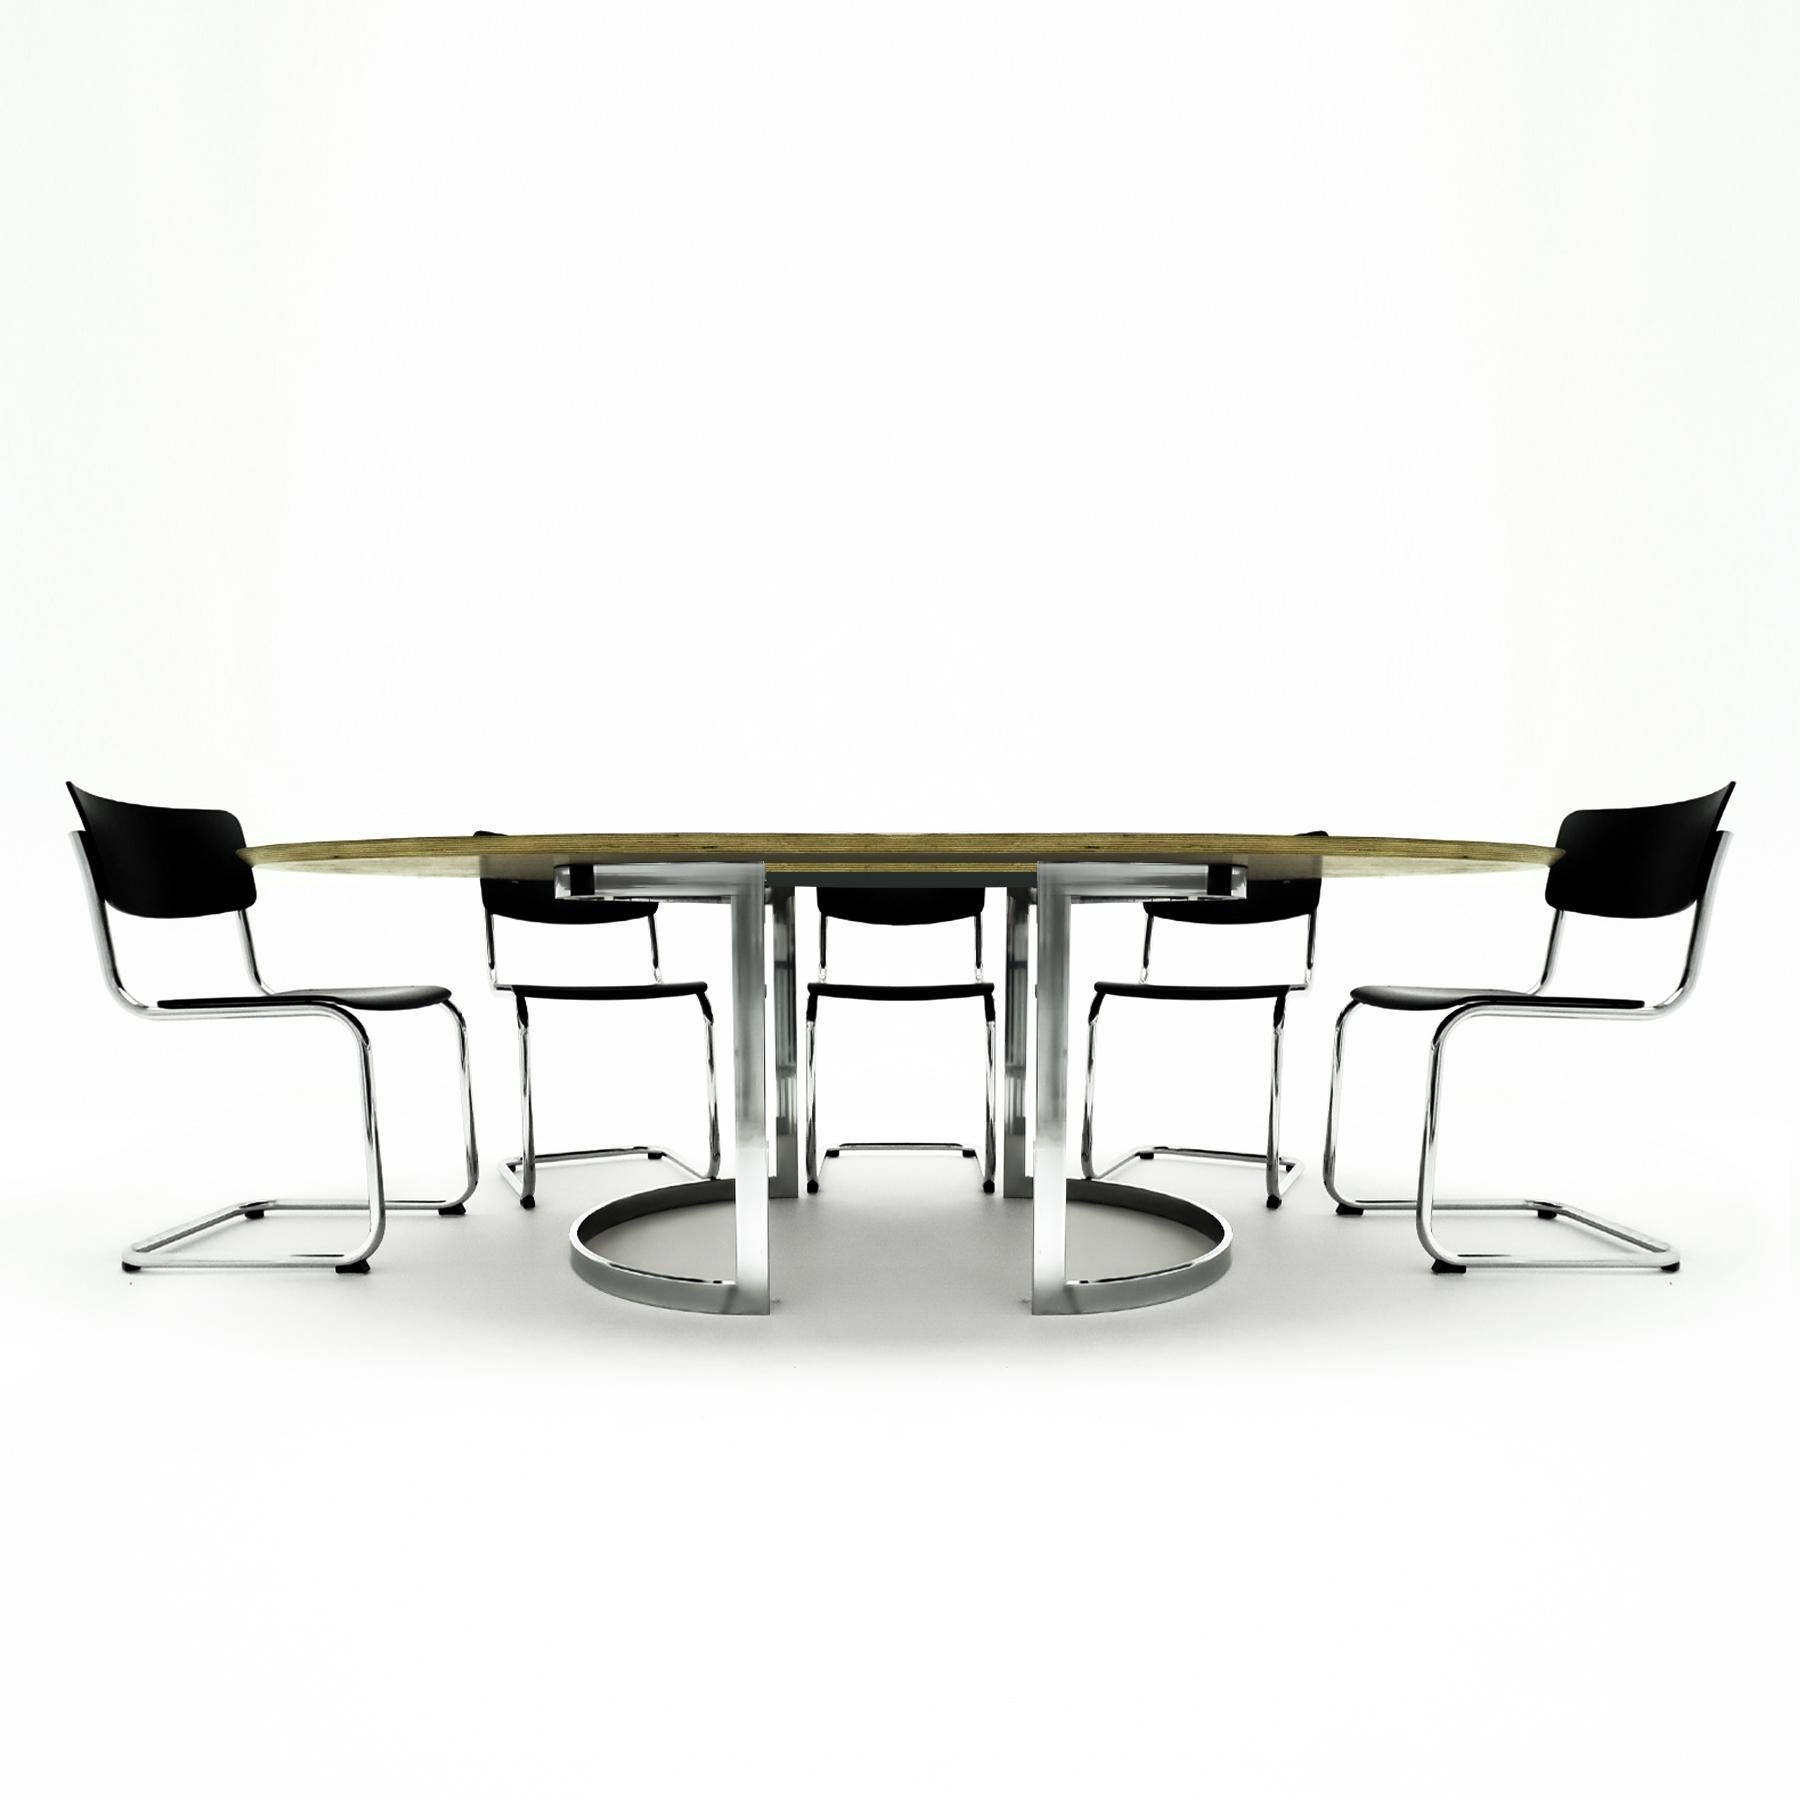 8 Mart Stam Thonet S43 chairs matched to a large Milo Baughman style table   2